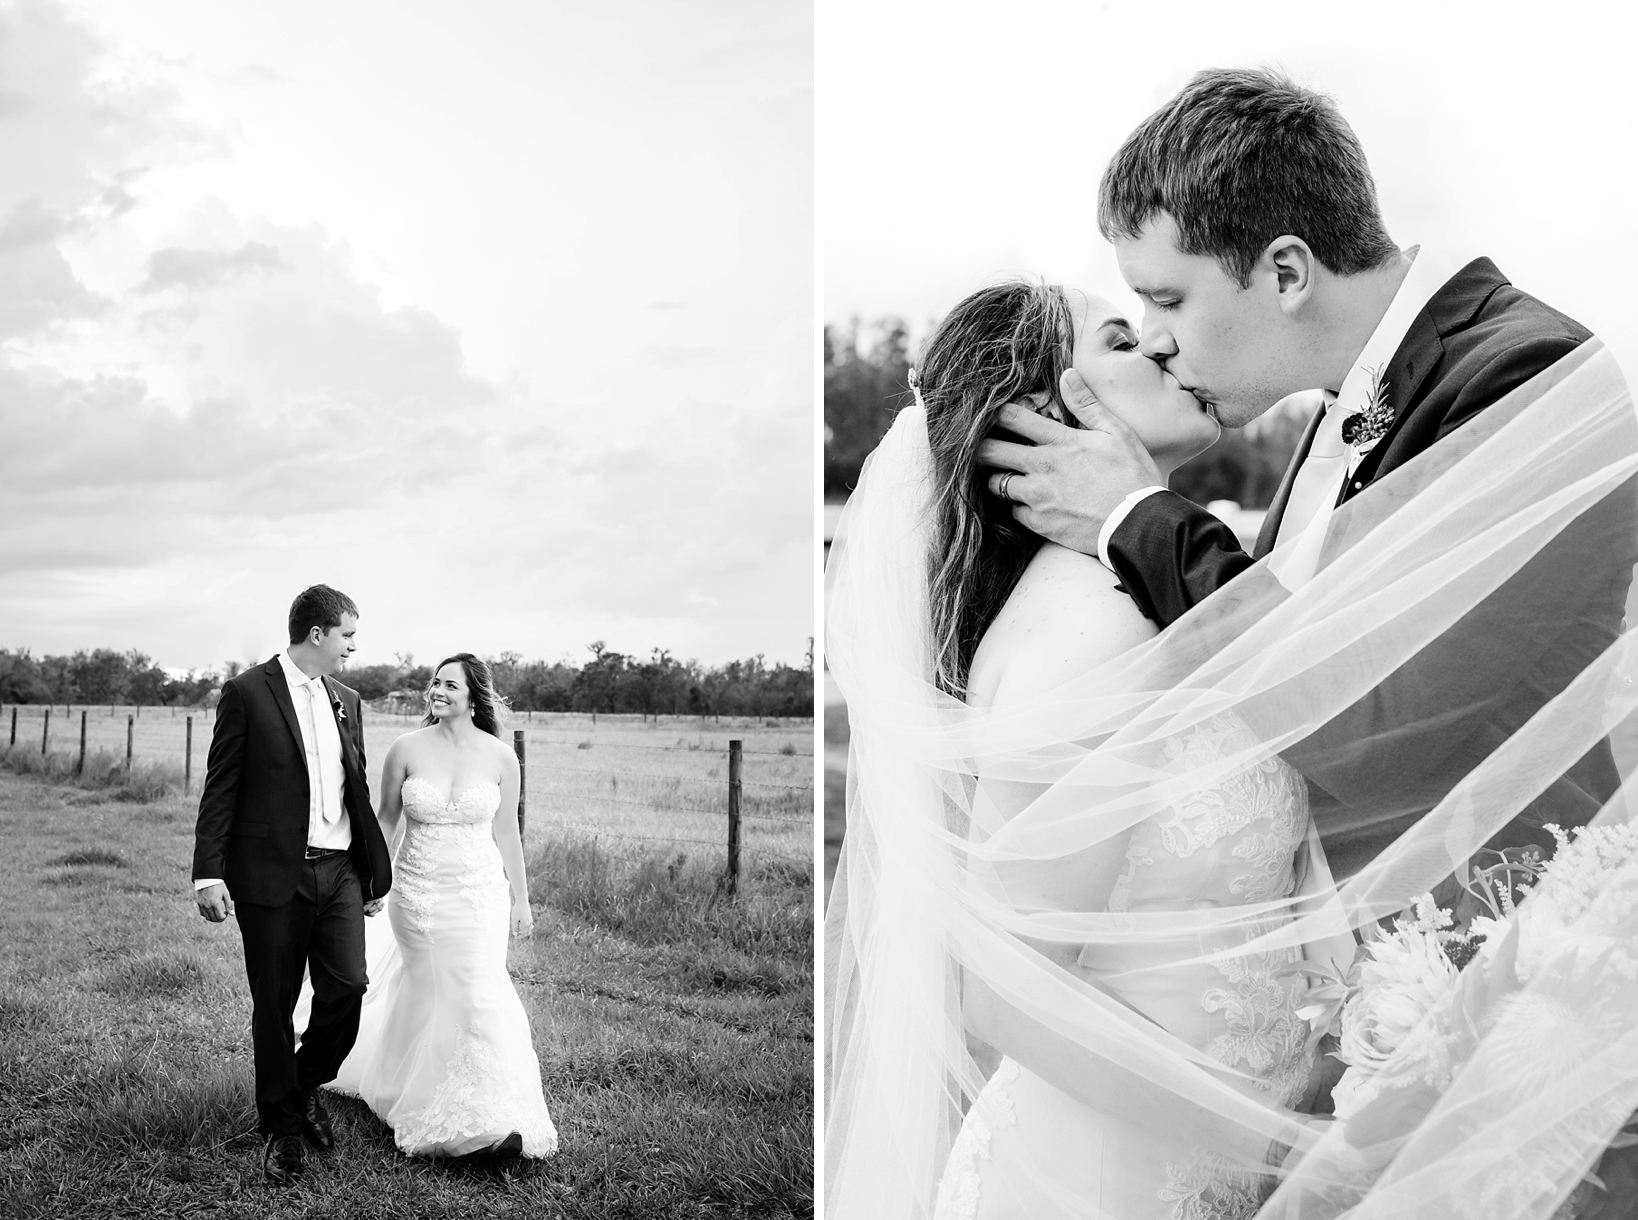 black and white image of the Bride & Groom by Sarah & Ben Photography